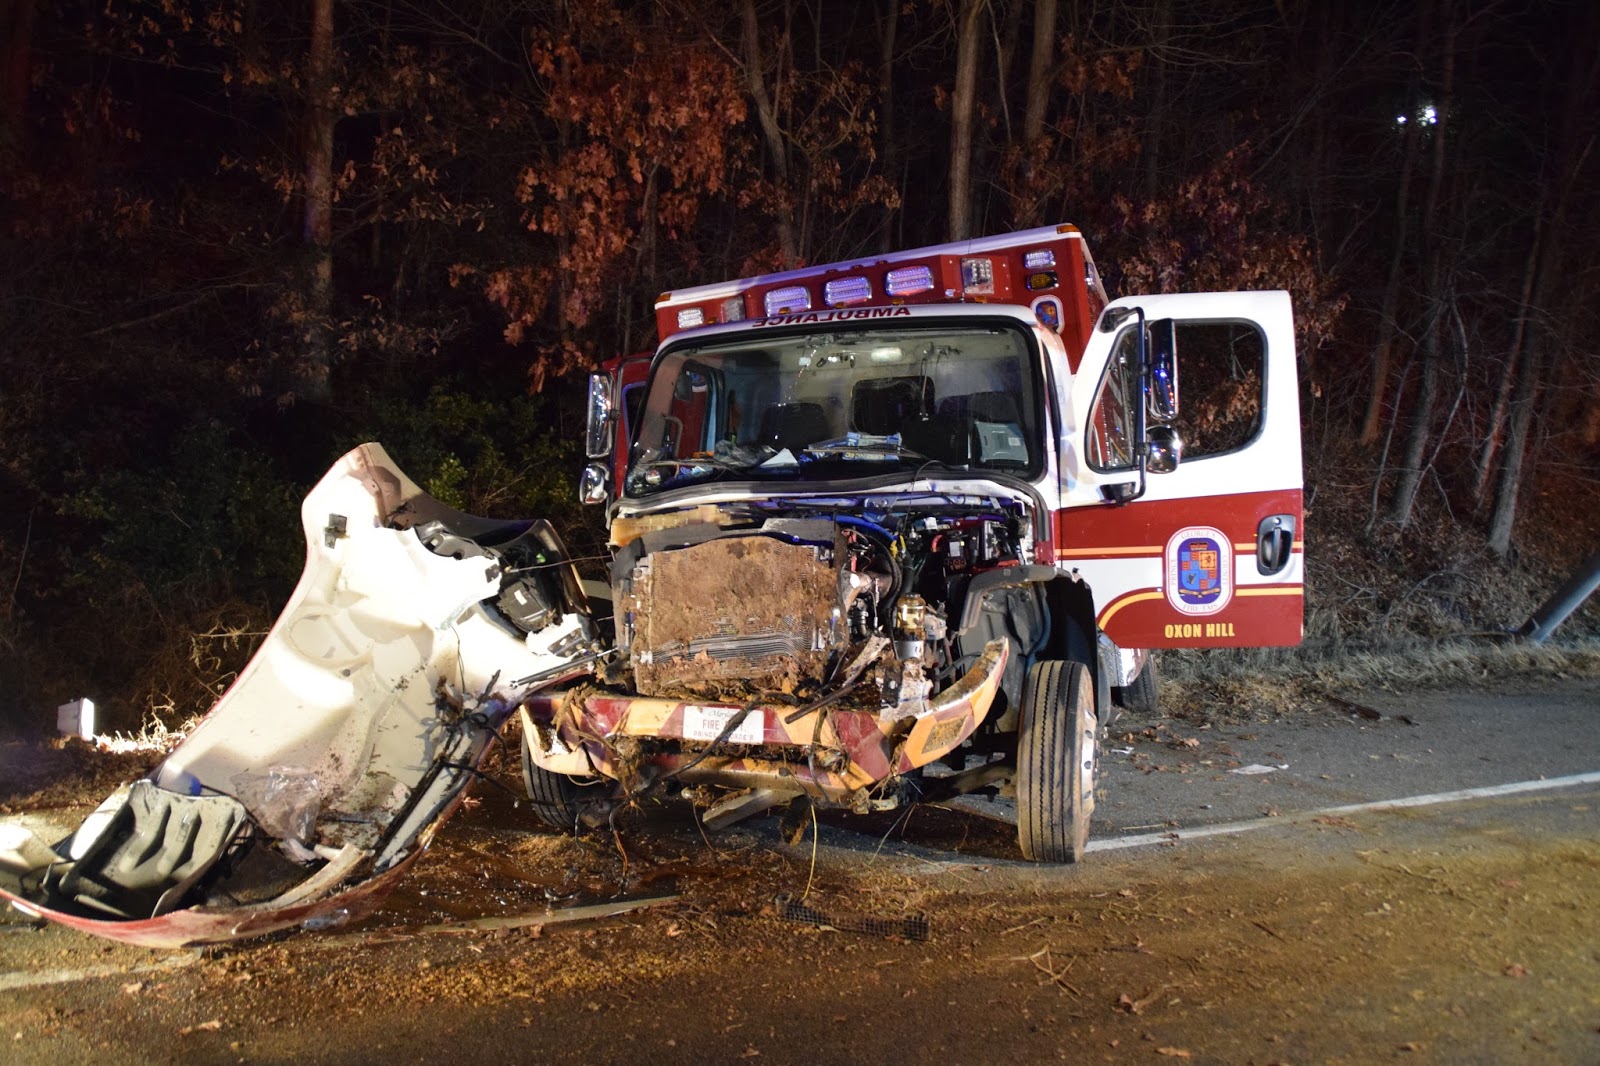 PHOTO:An ambulance was severely damaged in a crash on the Capital Beltway in Prince George County, Maryland, on Jan. 18, 2016, after being sideswiped by a civilian car, according to officials.  